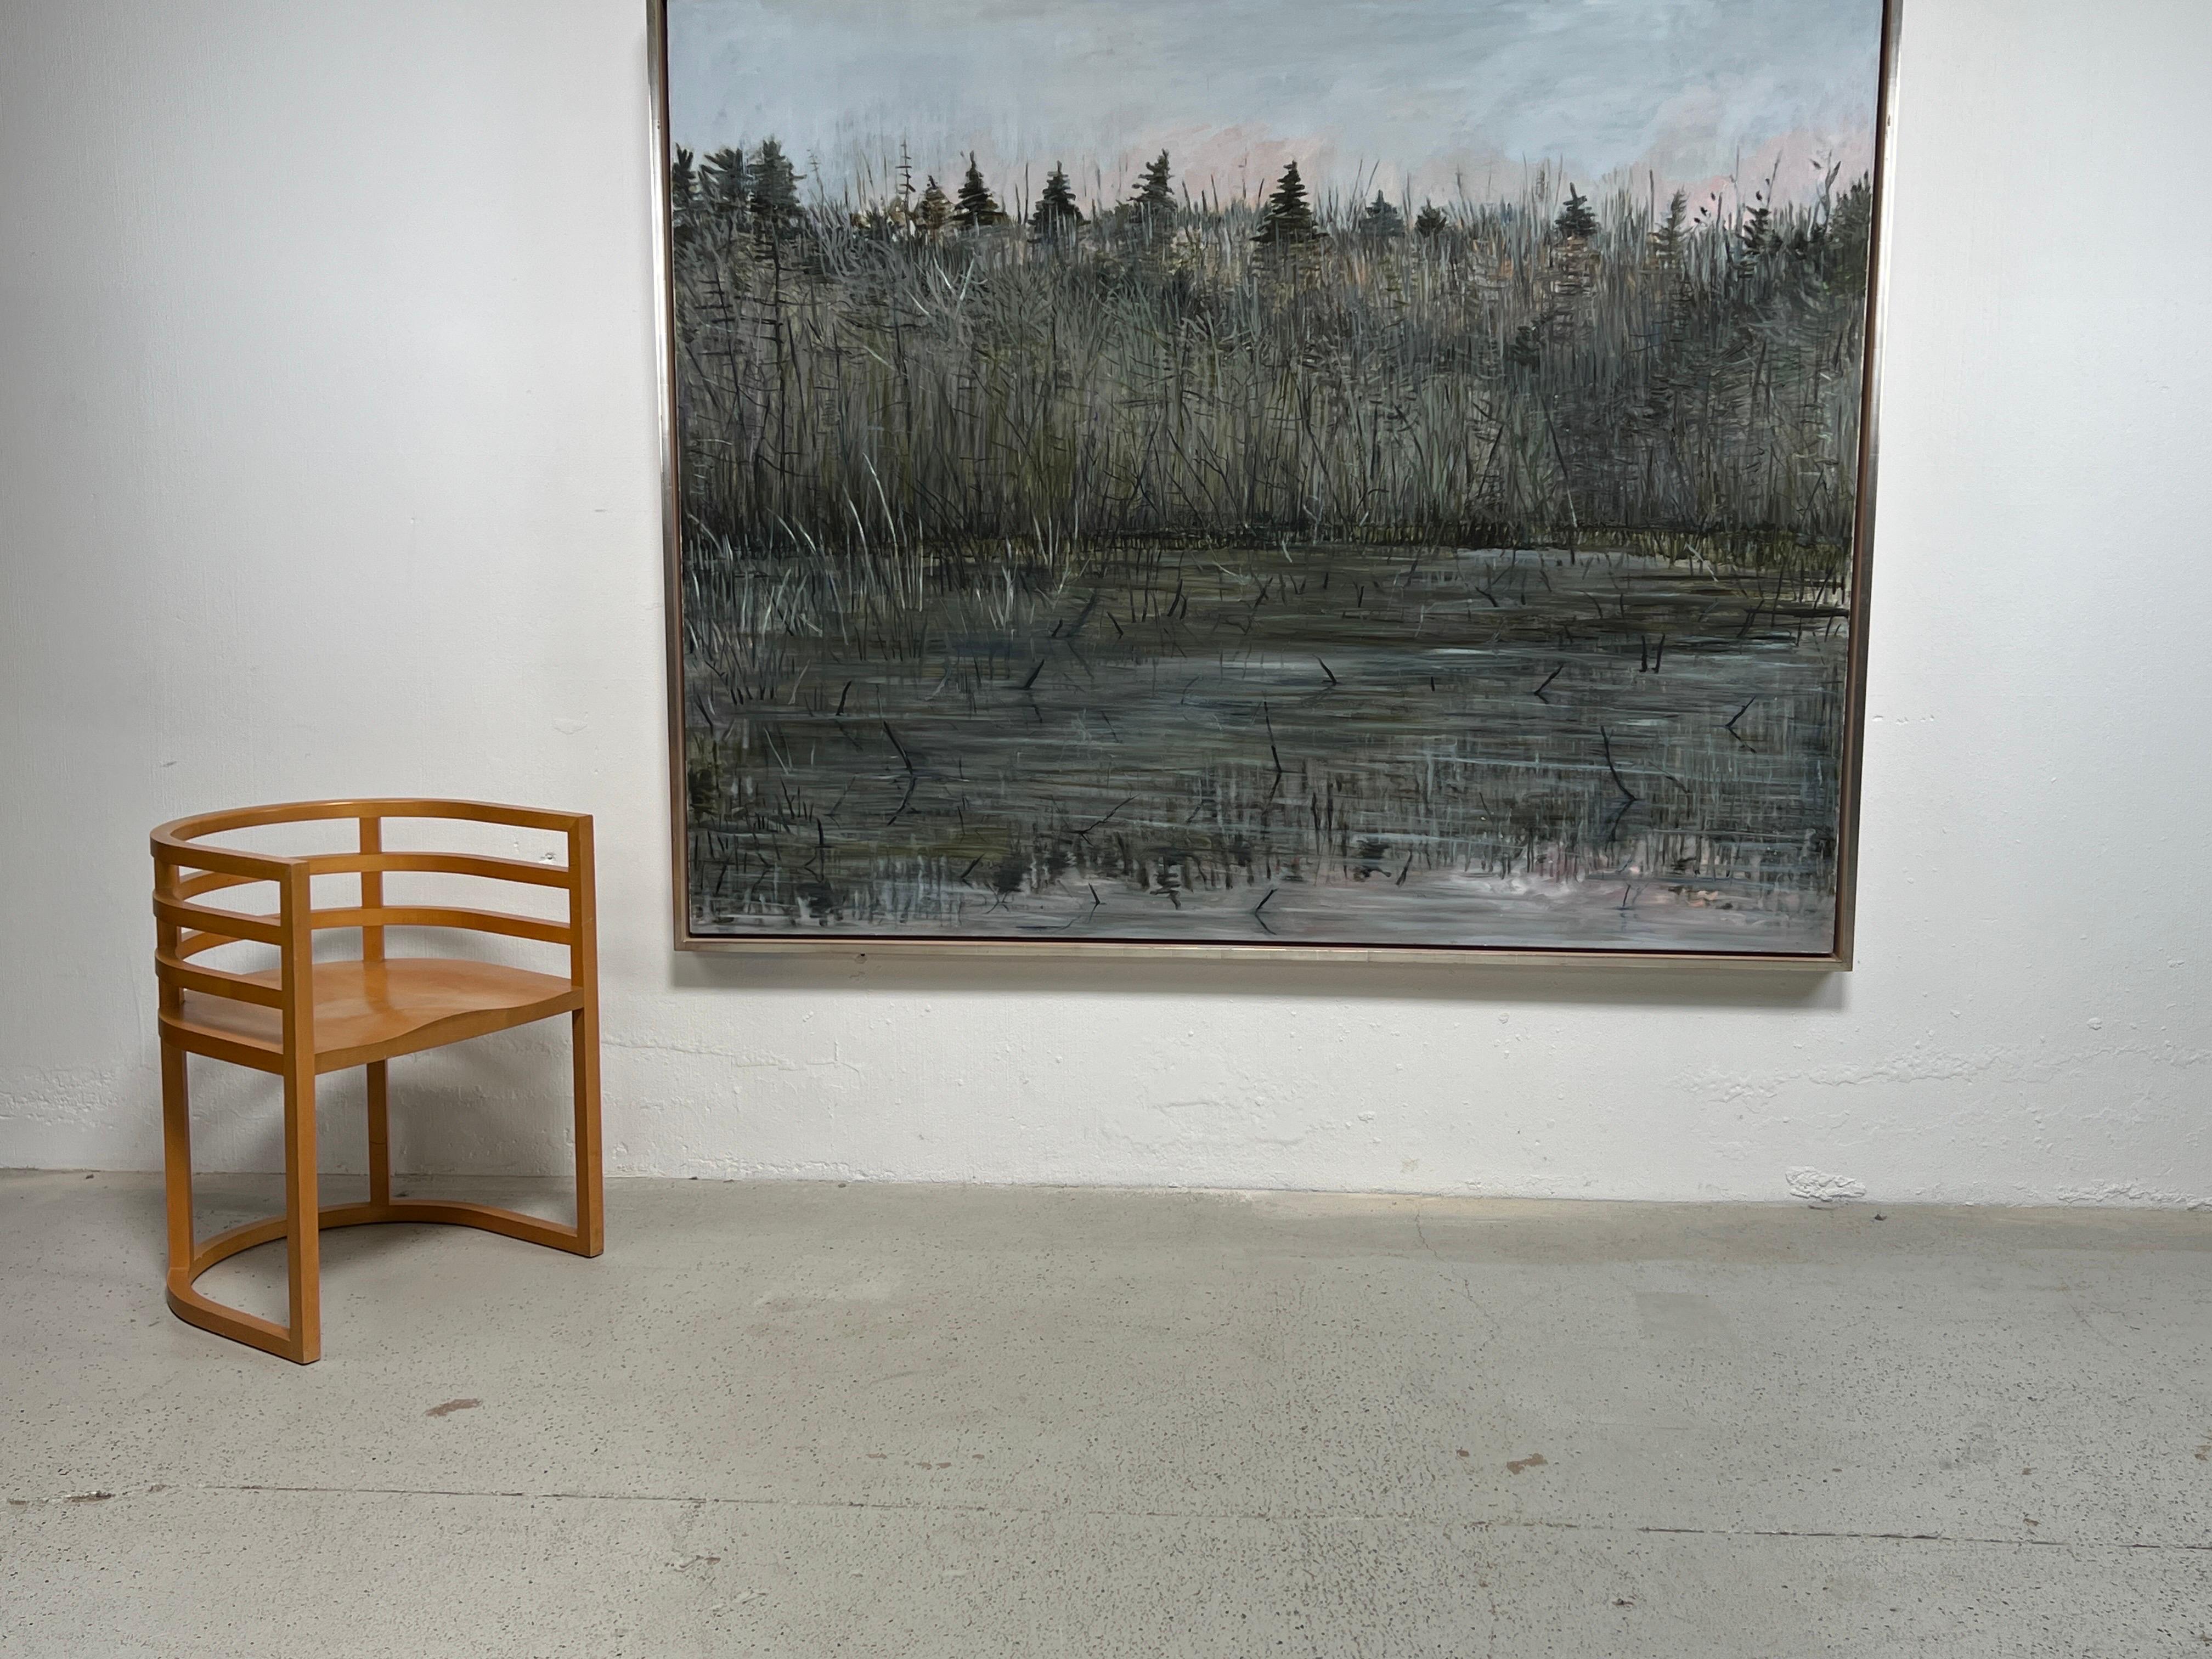 Uninhabited by human form, there's a stillness invoked in the landscape paintings of New York artist Nancy Brett (b. 1949) and 'Wing Rd.', dated 1989-90, is no exception. The cool, solitary wetlands of this landscape illustrate a calm that is almost